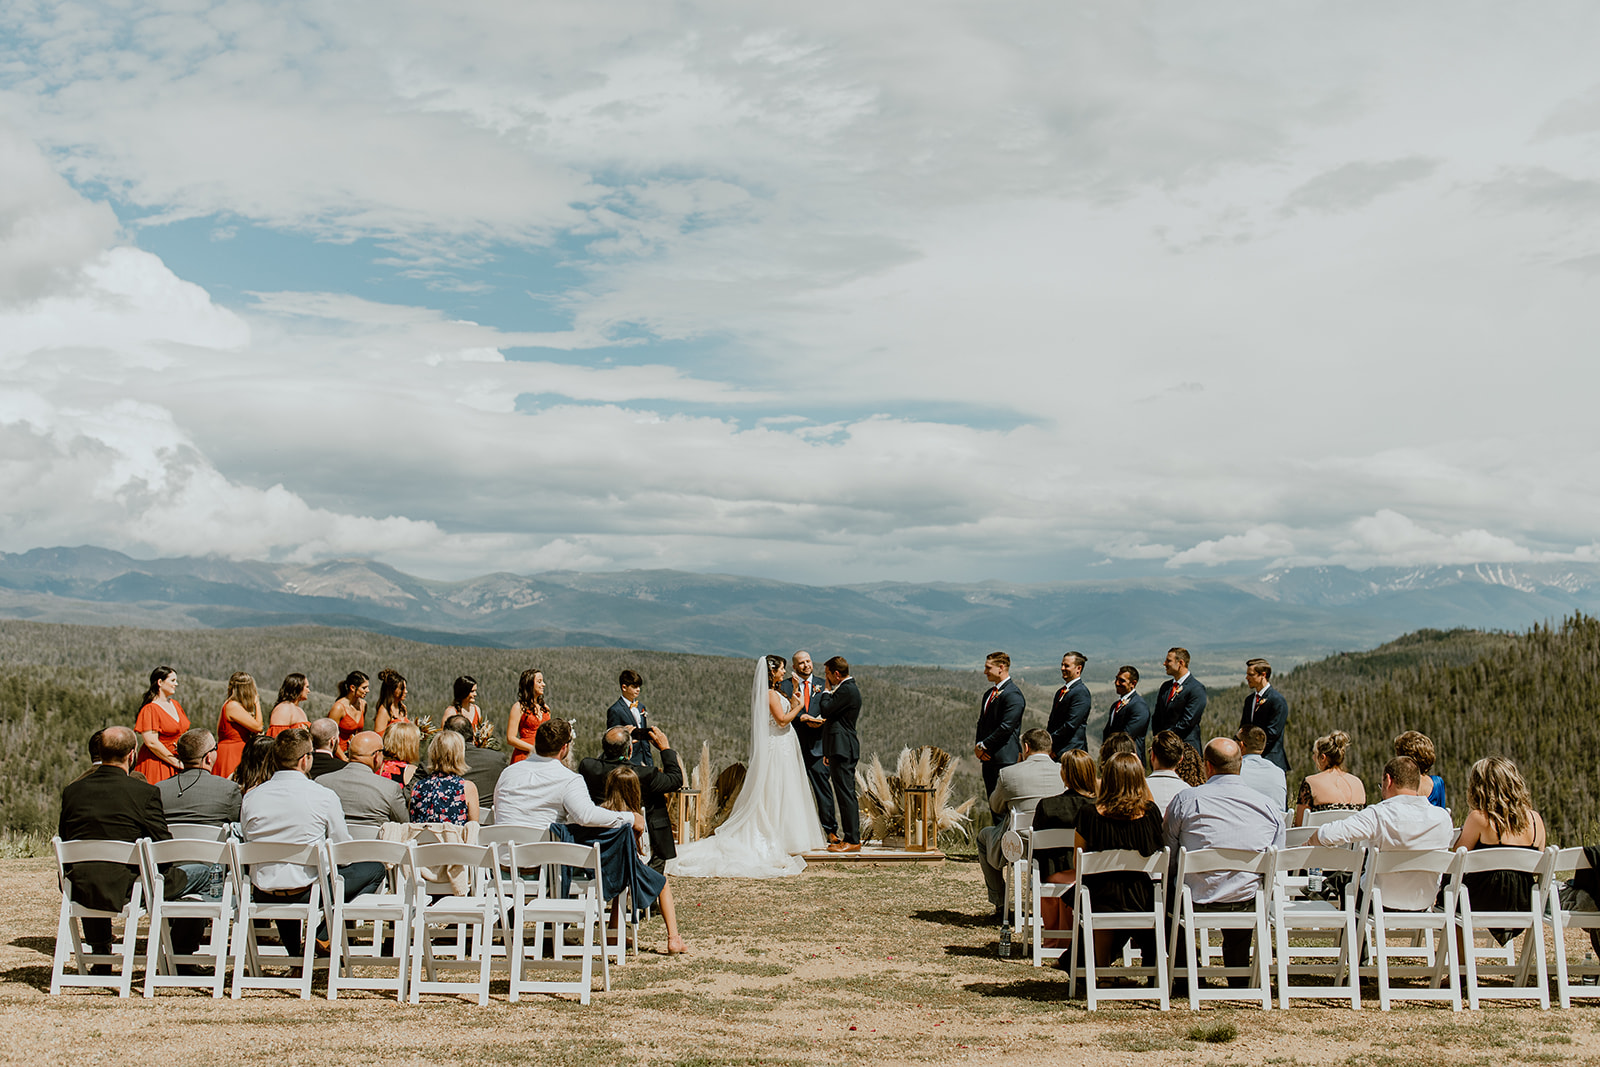 Couple gets married surrounded by friends and family on a Colorado mountain.